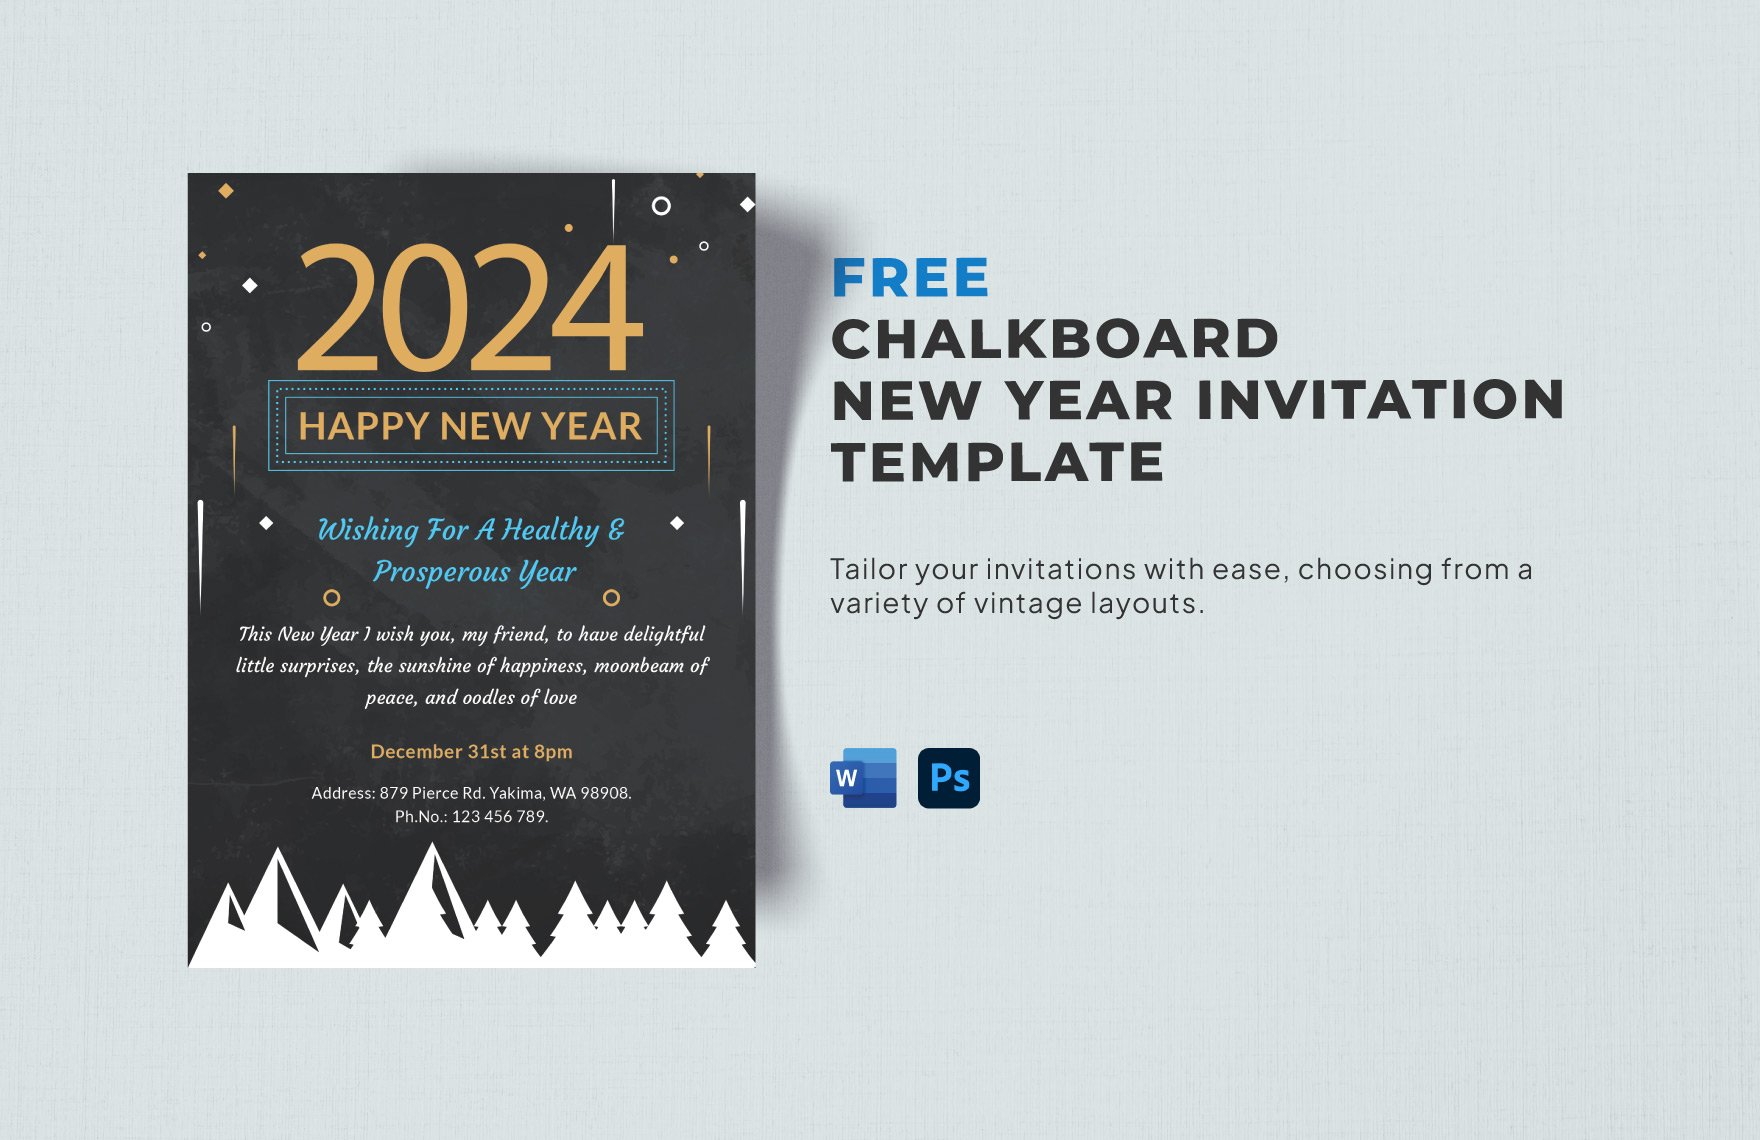 Chalkboard New Year Invitation Template in Word, PSD, Apple Pages